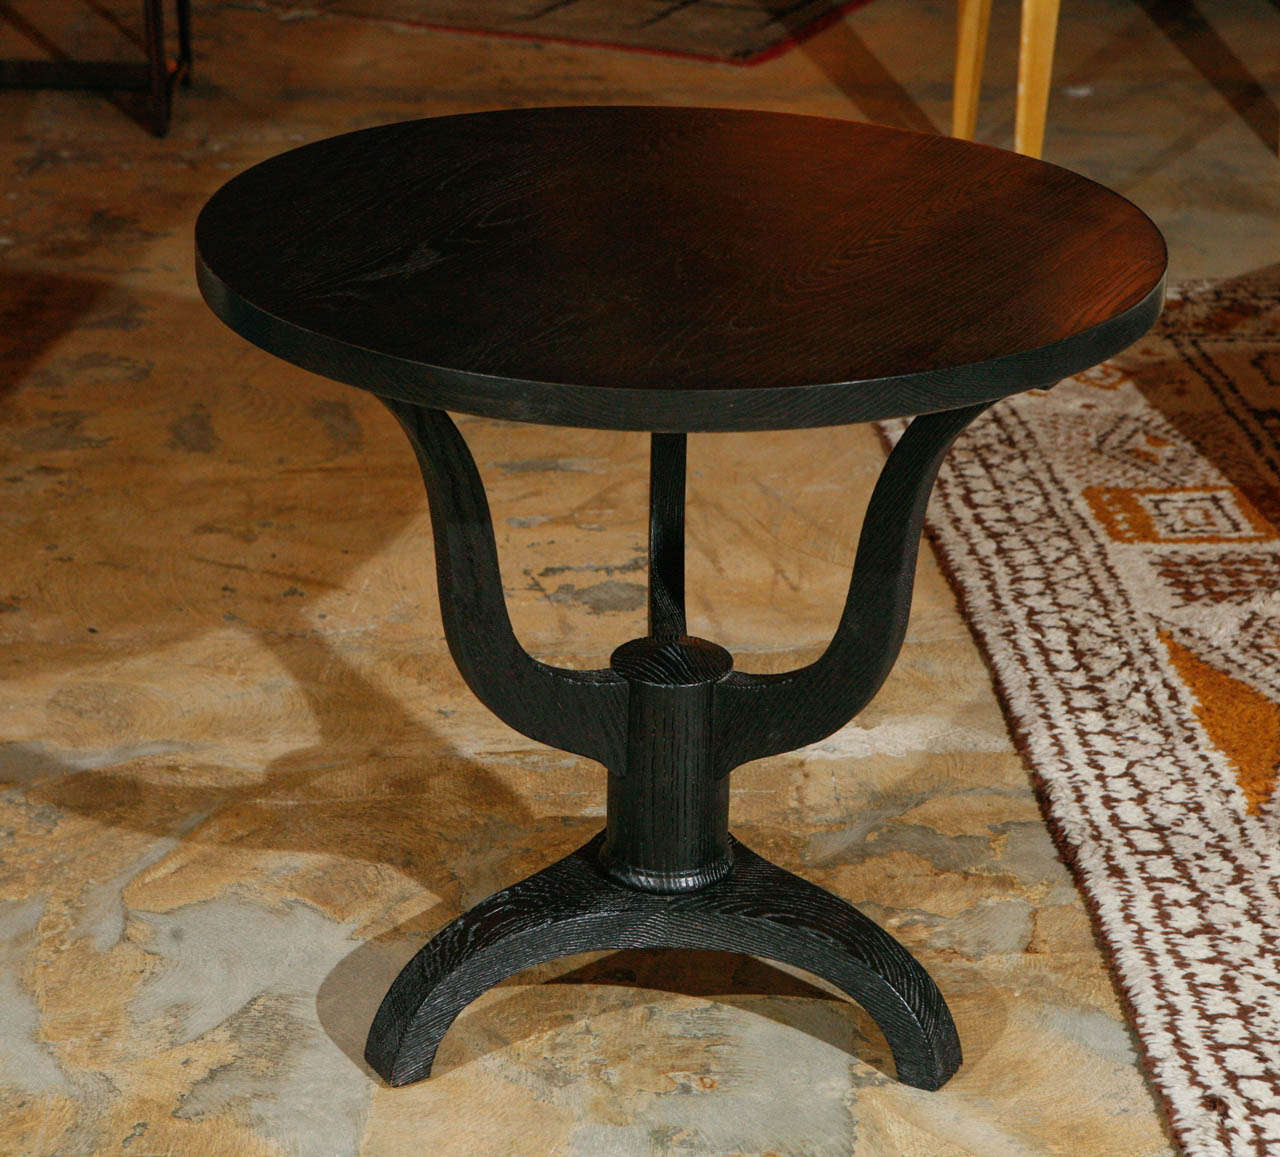 Larger oak side table refinished in distressed ebony.